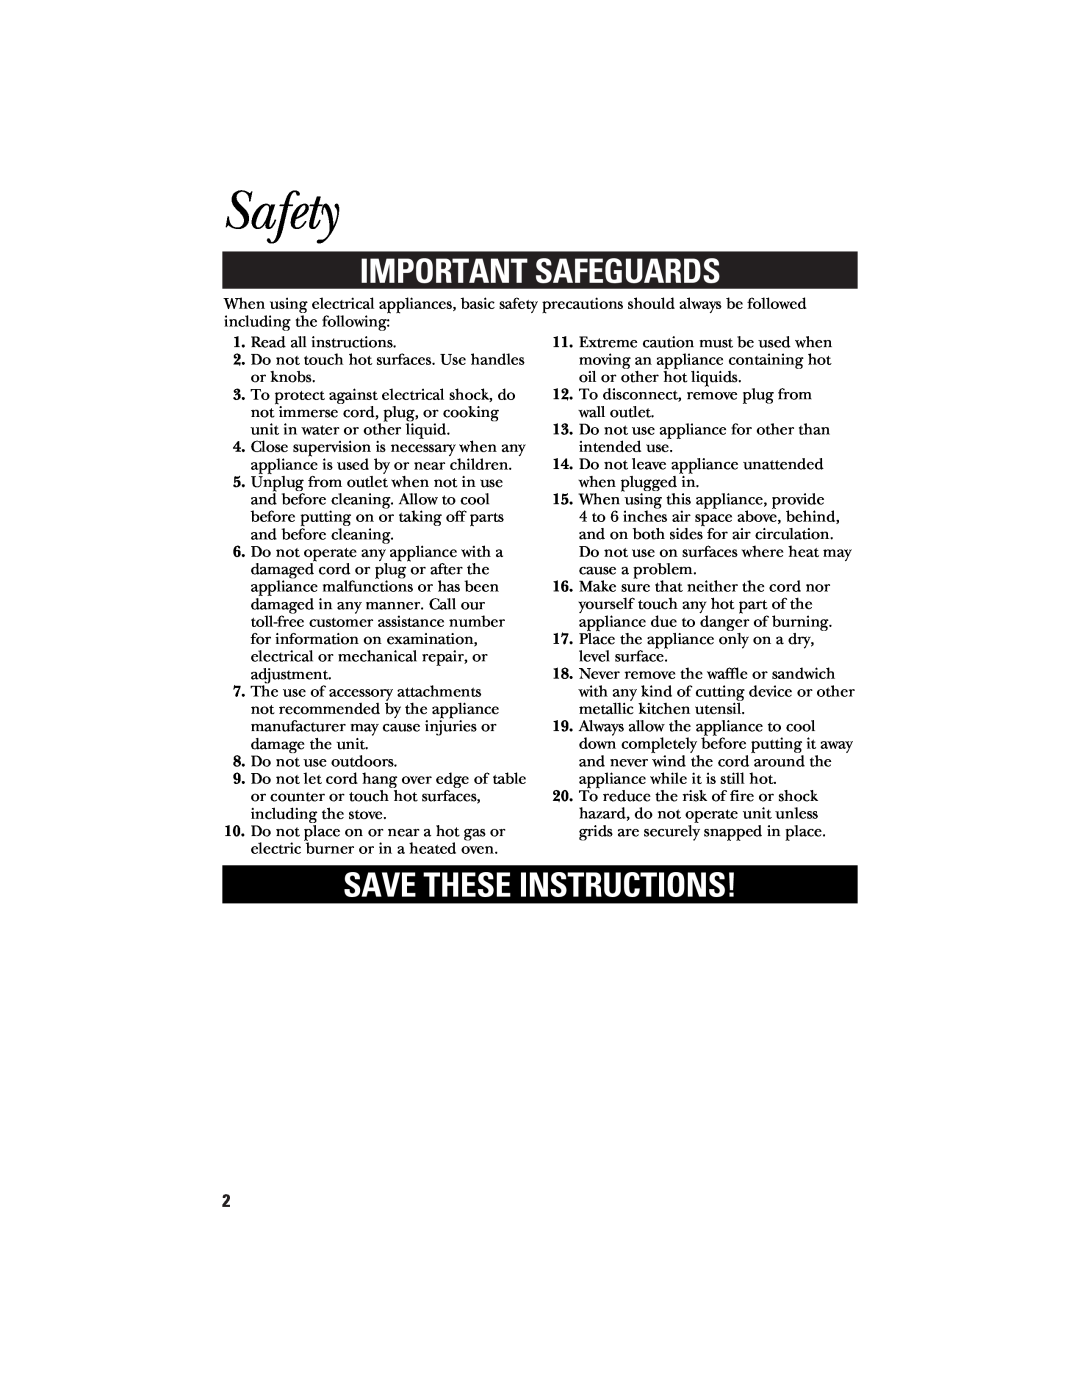 GE 840085700, 106582 manual Safety, Important Safeguards, Save These Instructions 